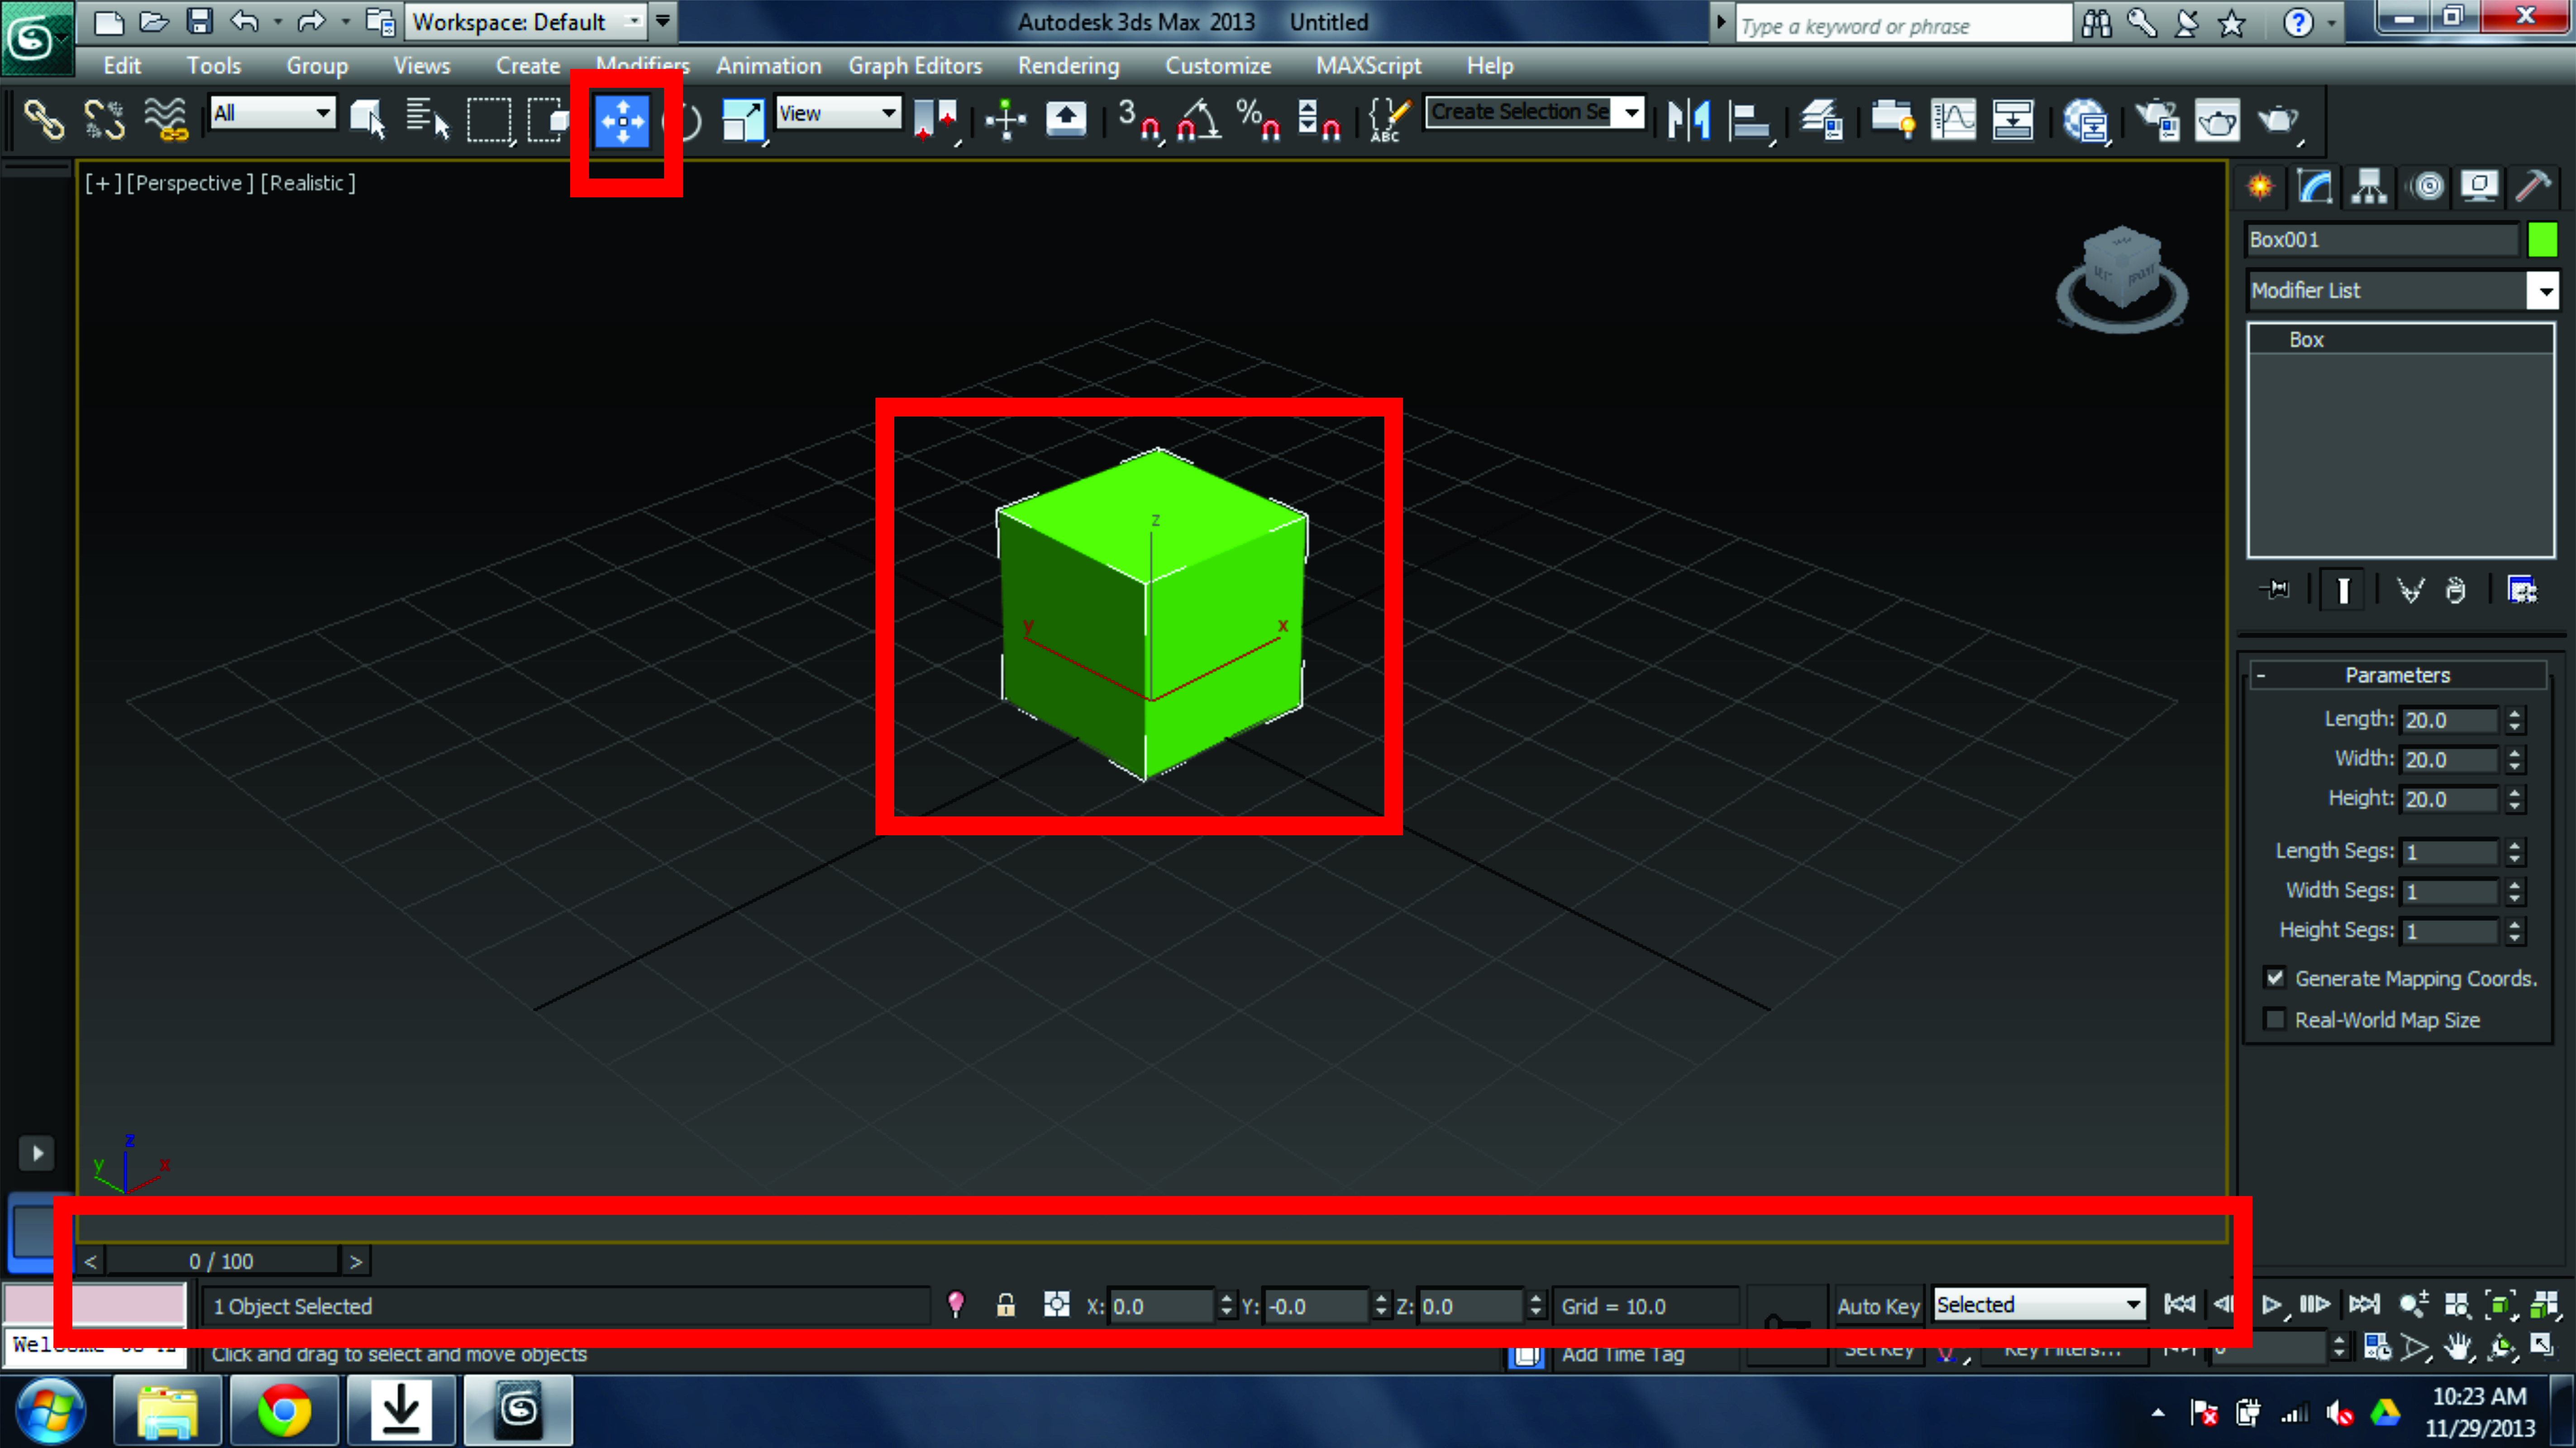 Timeline and moving gizmo is disappear - Autodesk Community - 3ds Max